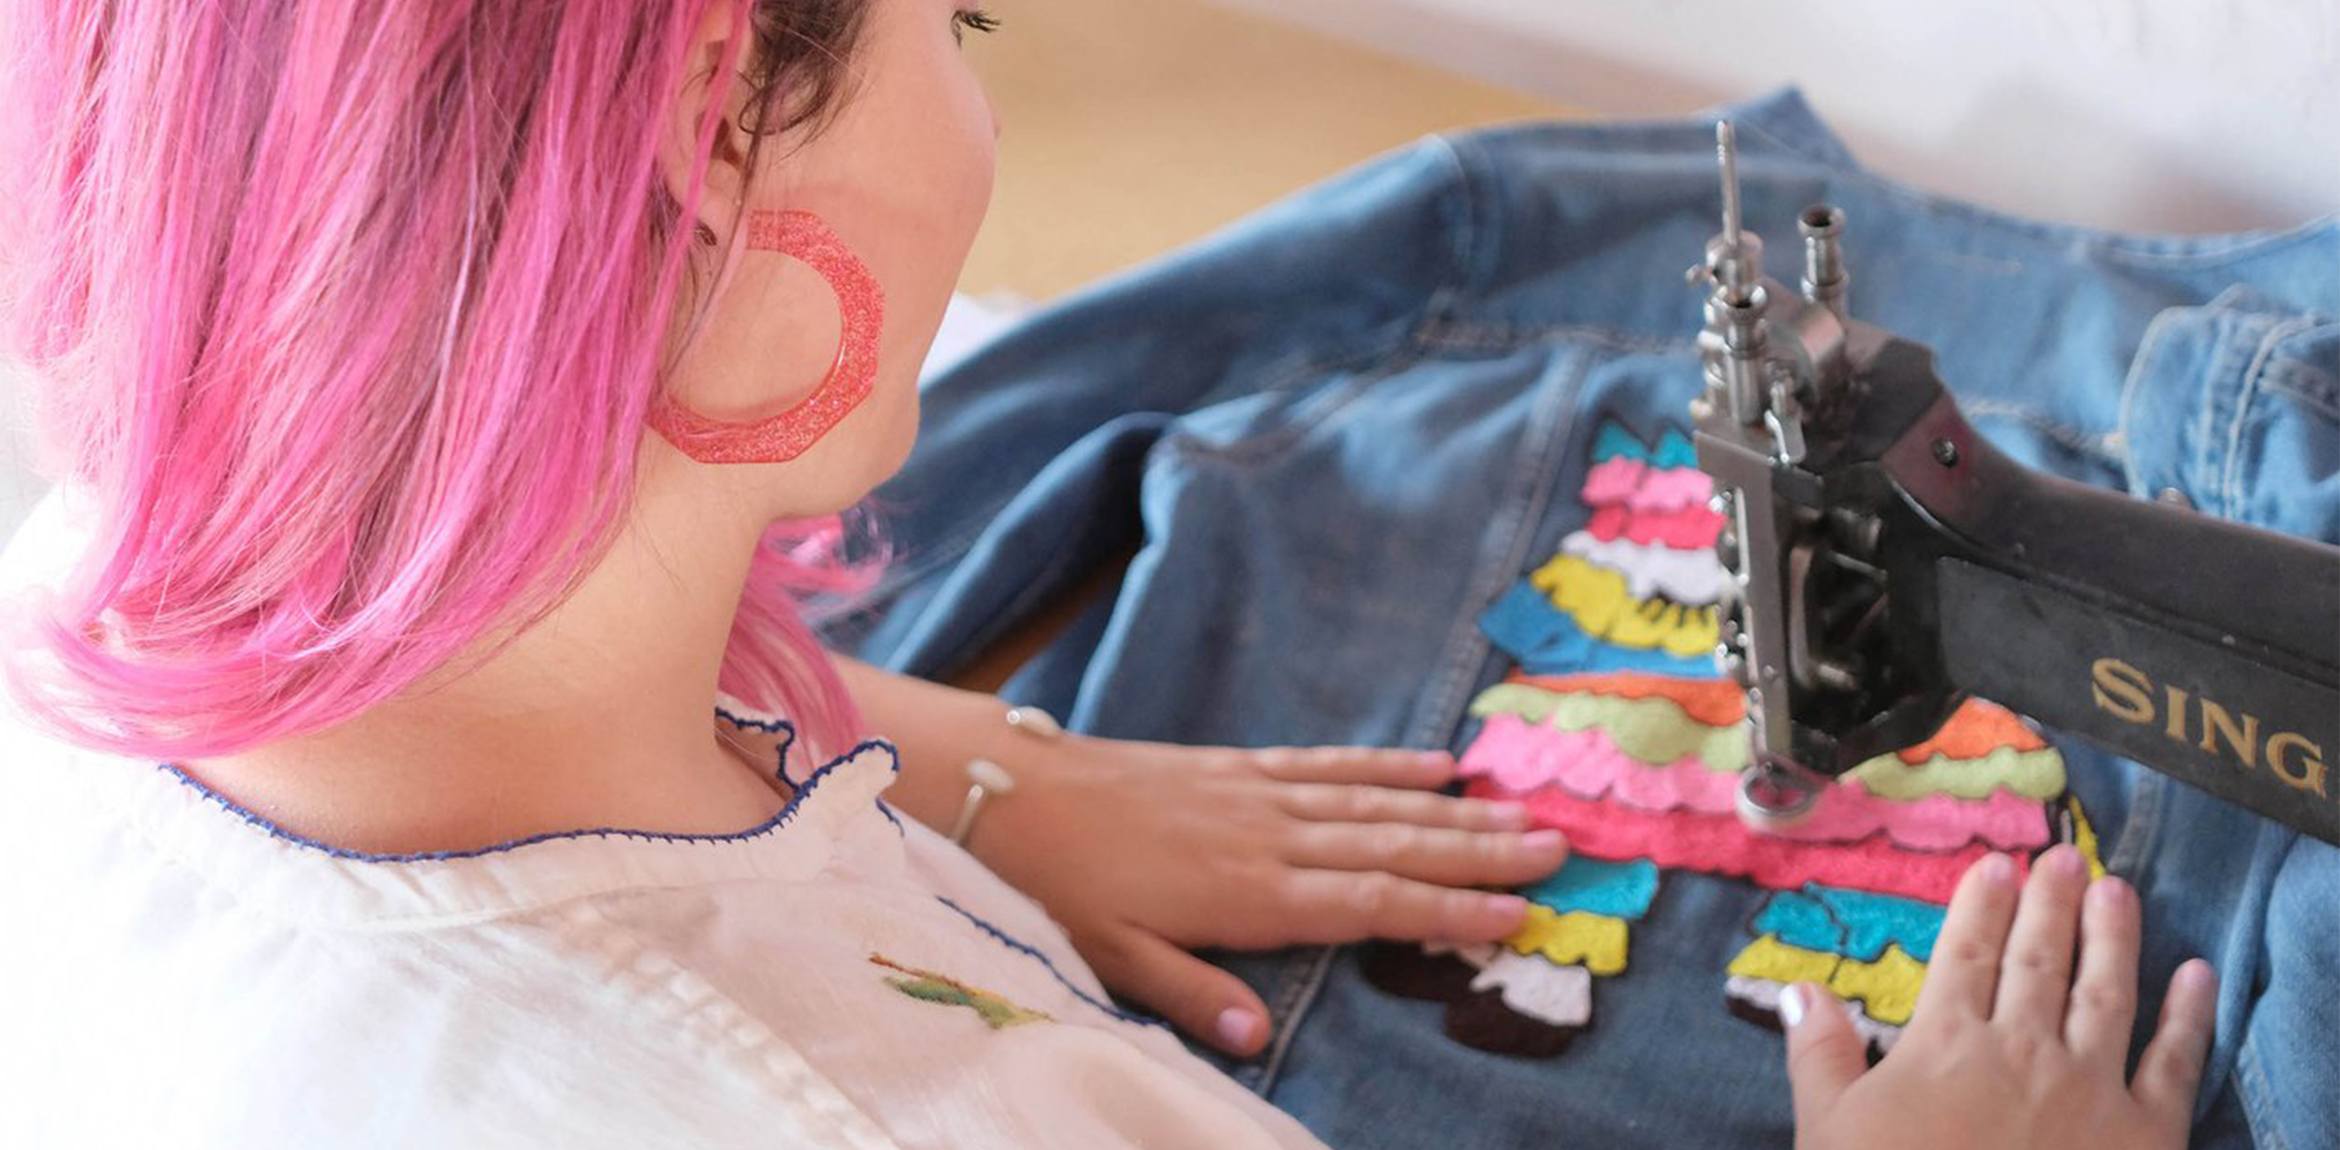 An individual with pink hair embroidering a denim jacket with colorful threads